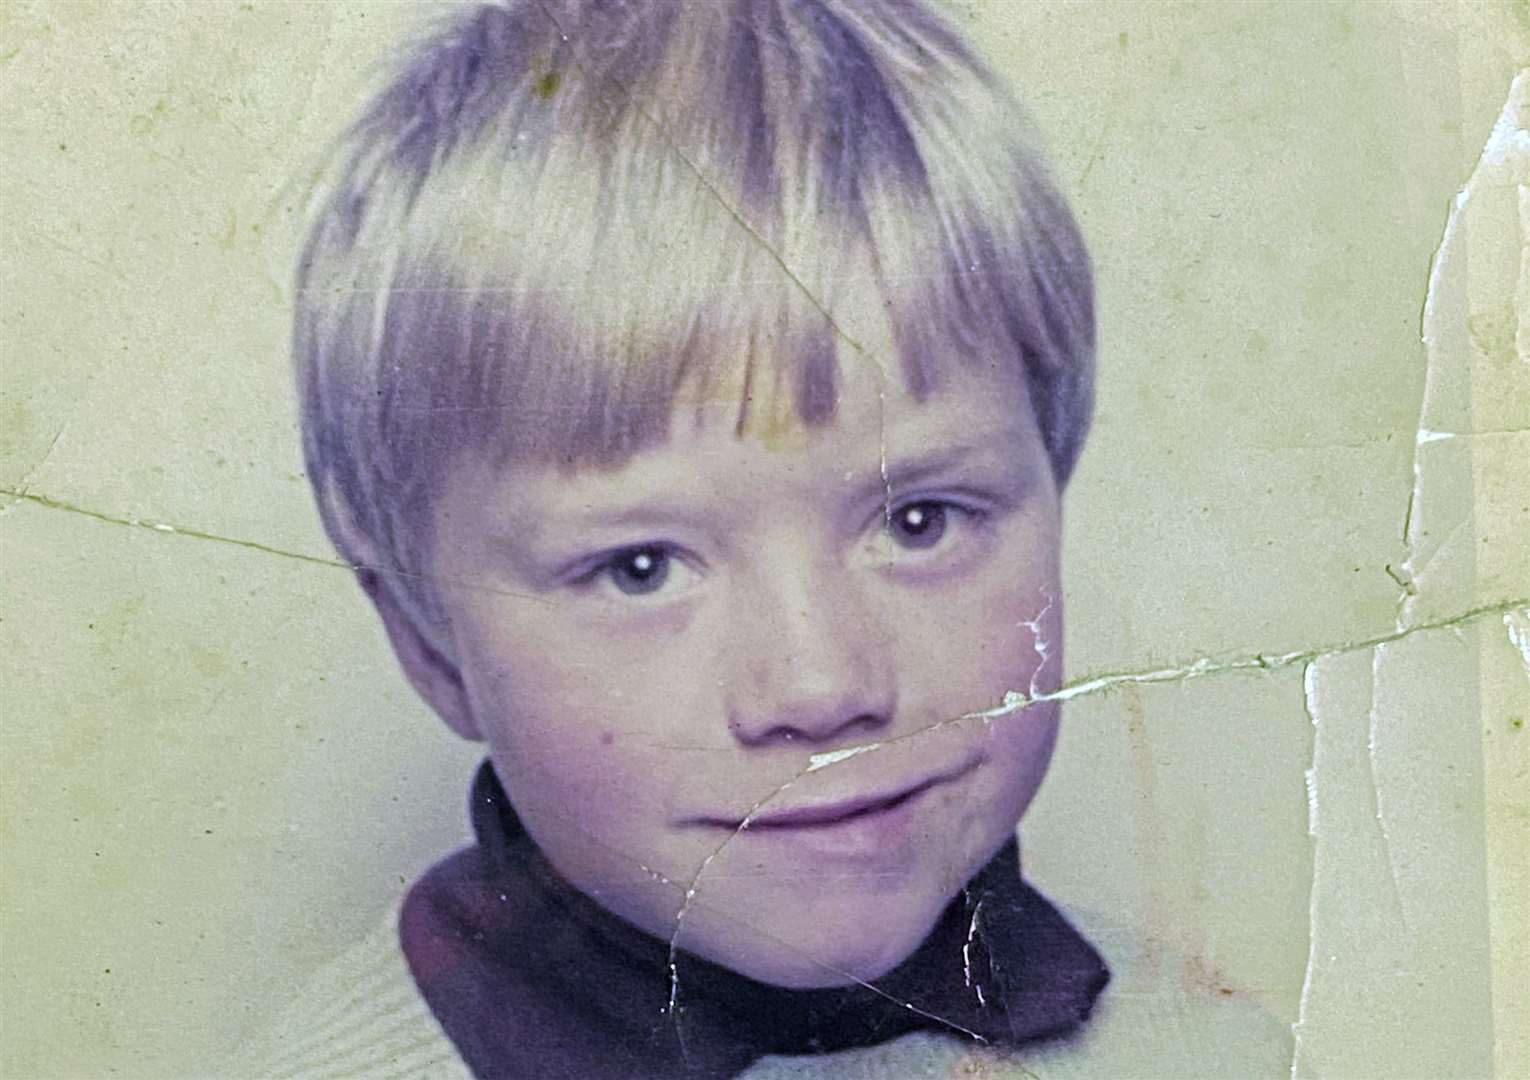 John Hacking, pictured as a child. Picture: WallToWall